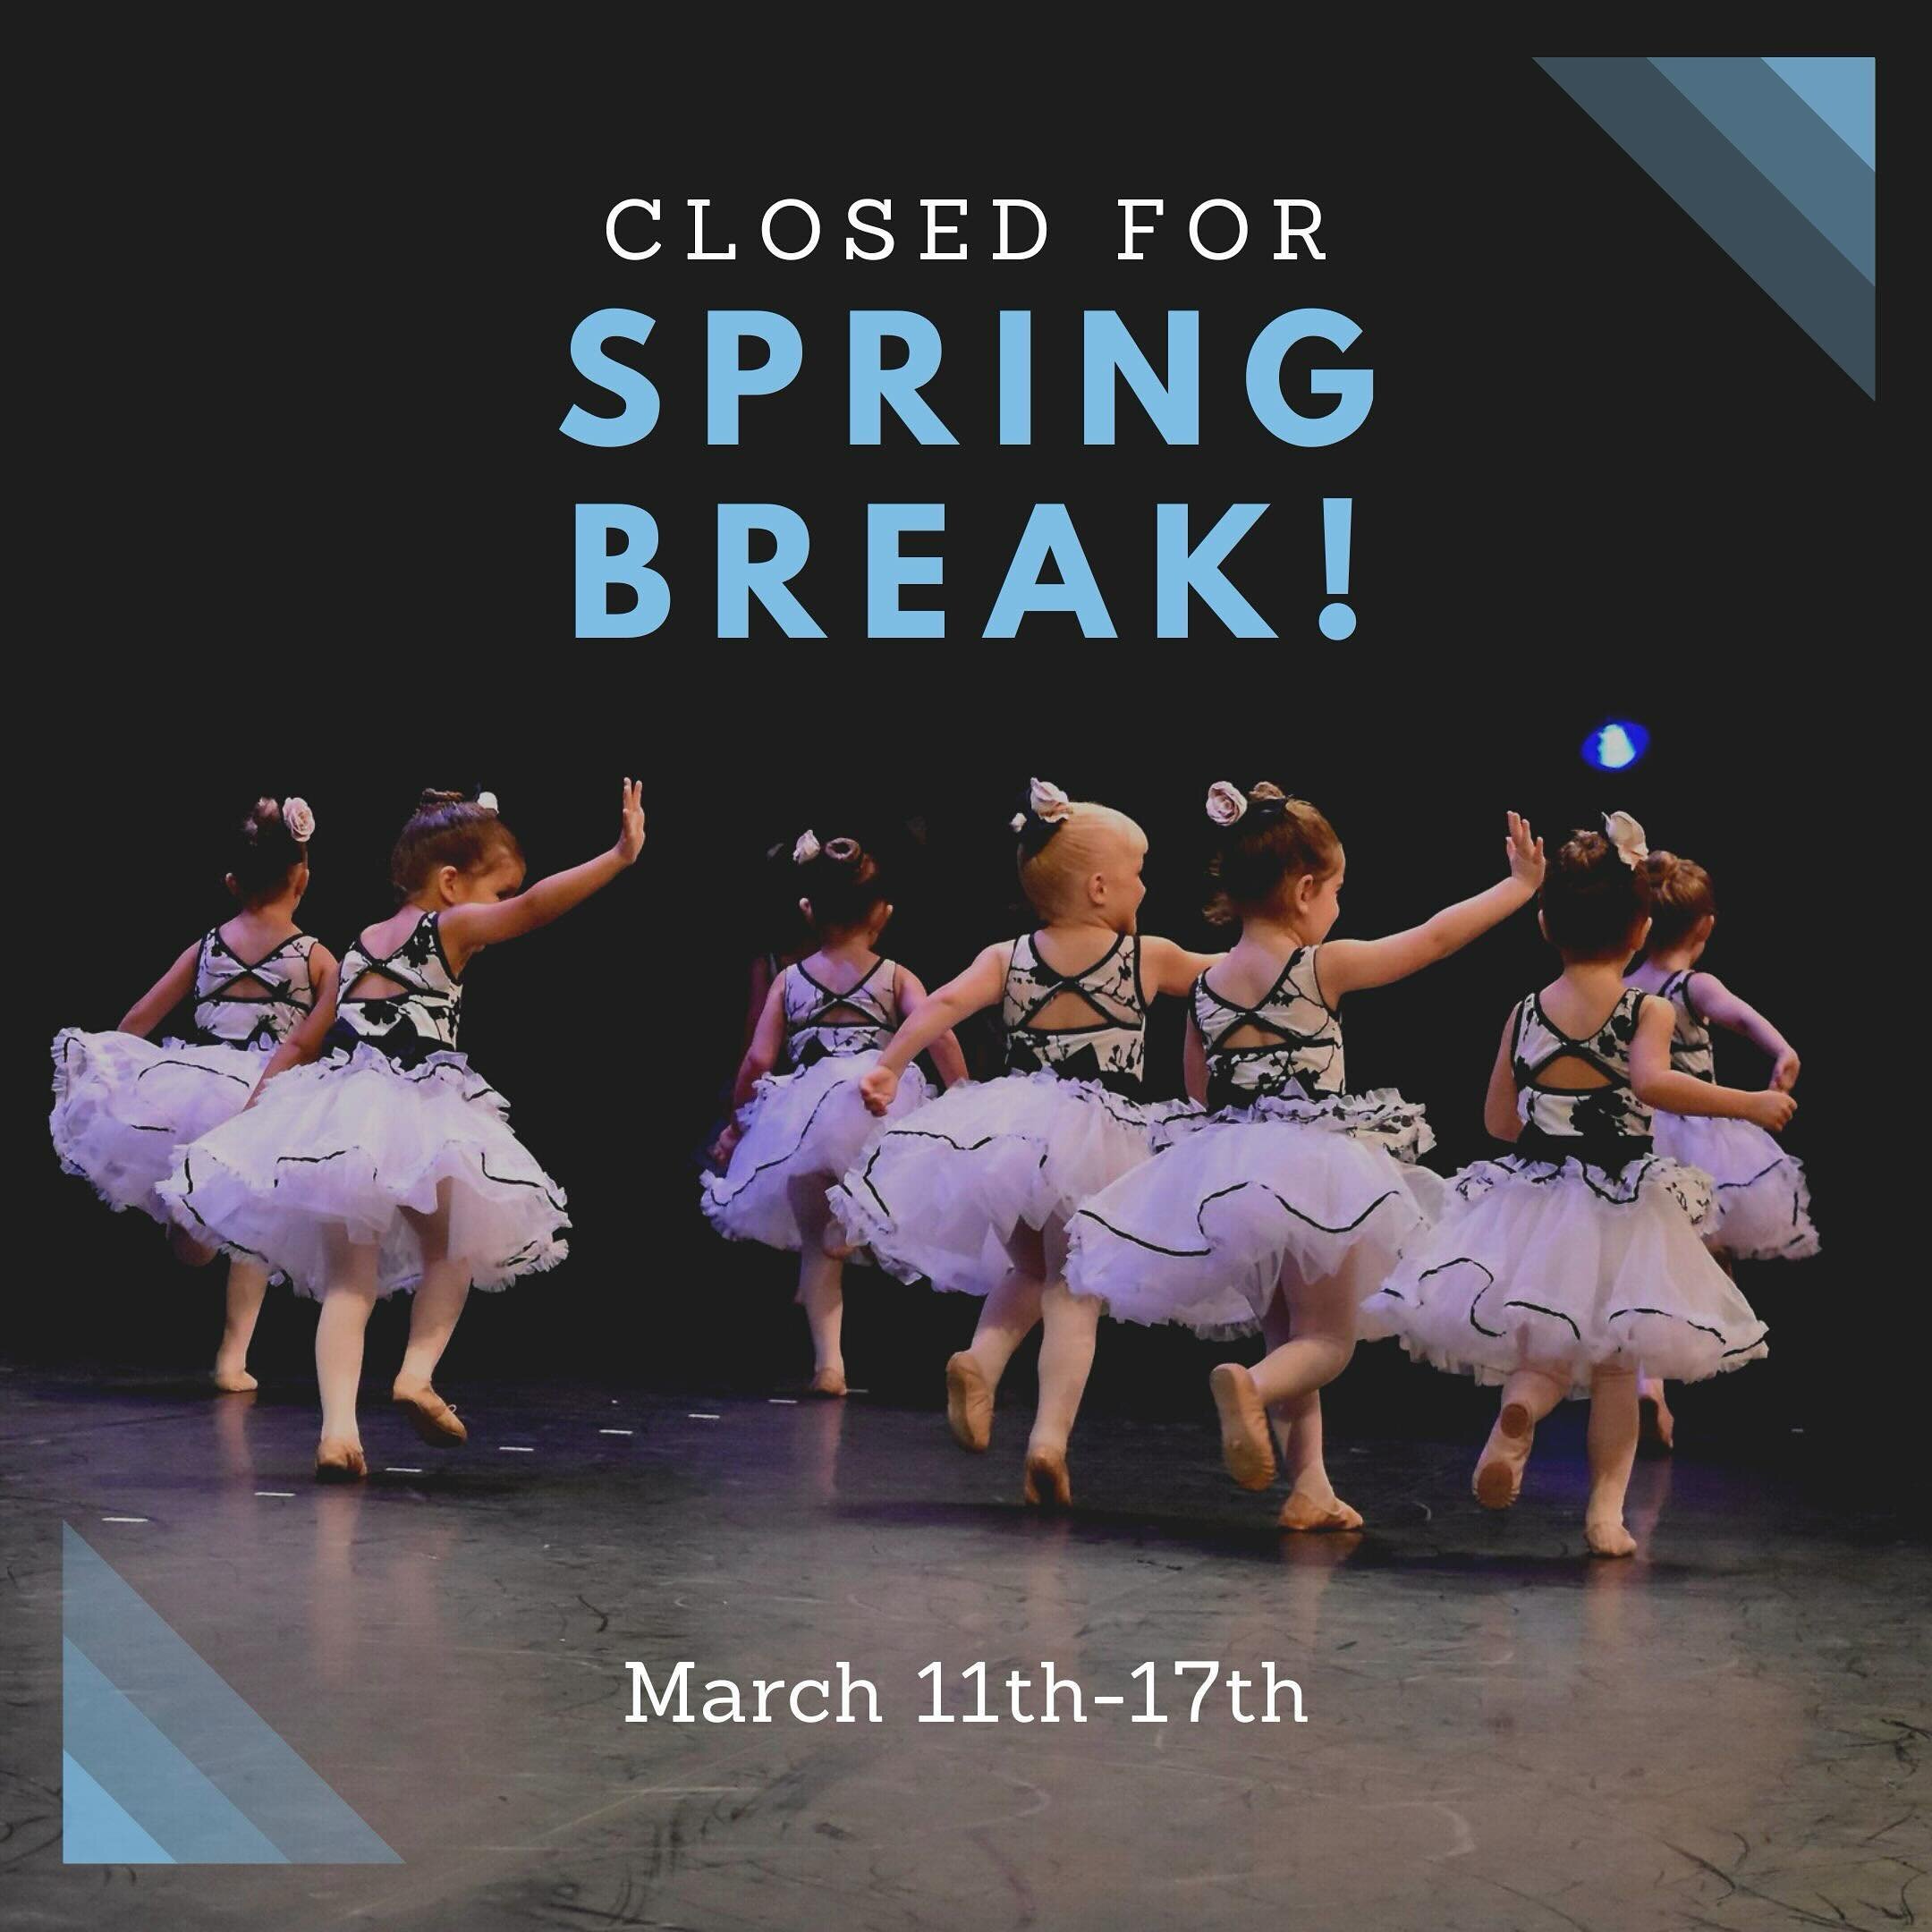 It&rsquo;s Spring Break! No classes this week, we&rsquo;ll see you back at the studio starting Monday, March 18th! 
&bull;
&bull;
&bull;
&bull;
&bull;
&bull;
#Dance #Dancers #SuncoastAcademyOfDance #DanceAtSuncoast #SuncoastDancers #Suncoastians #Art